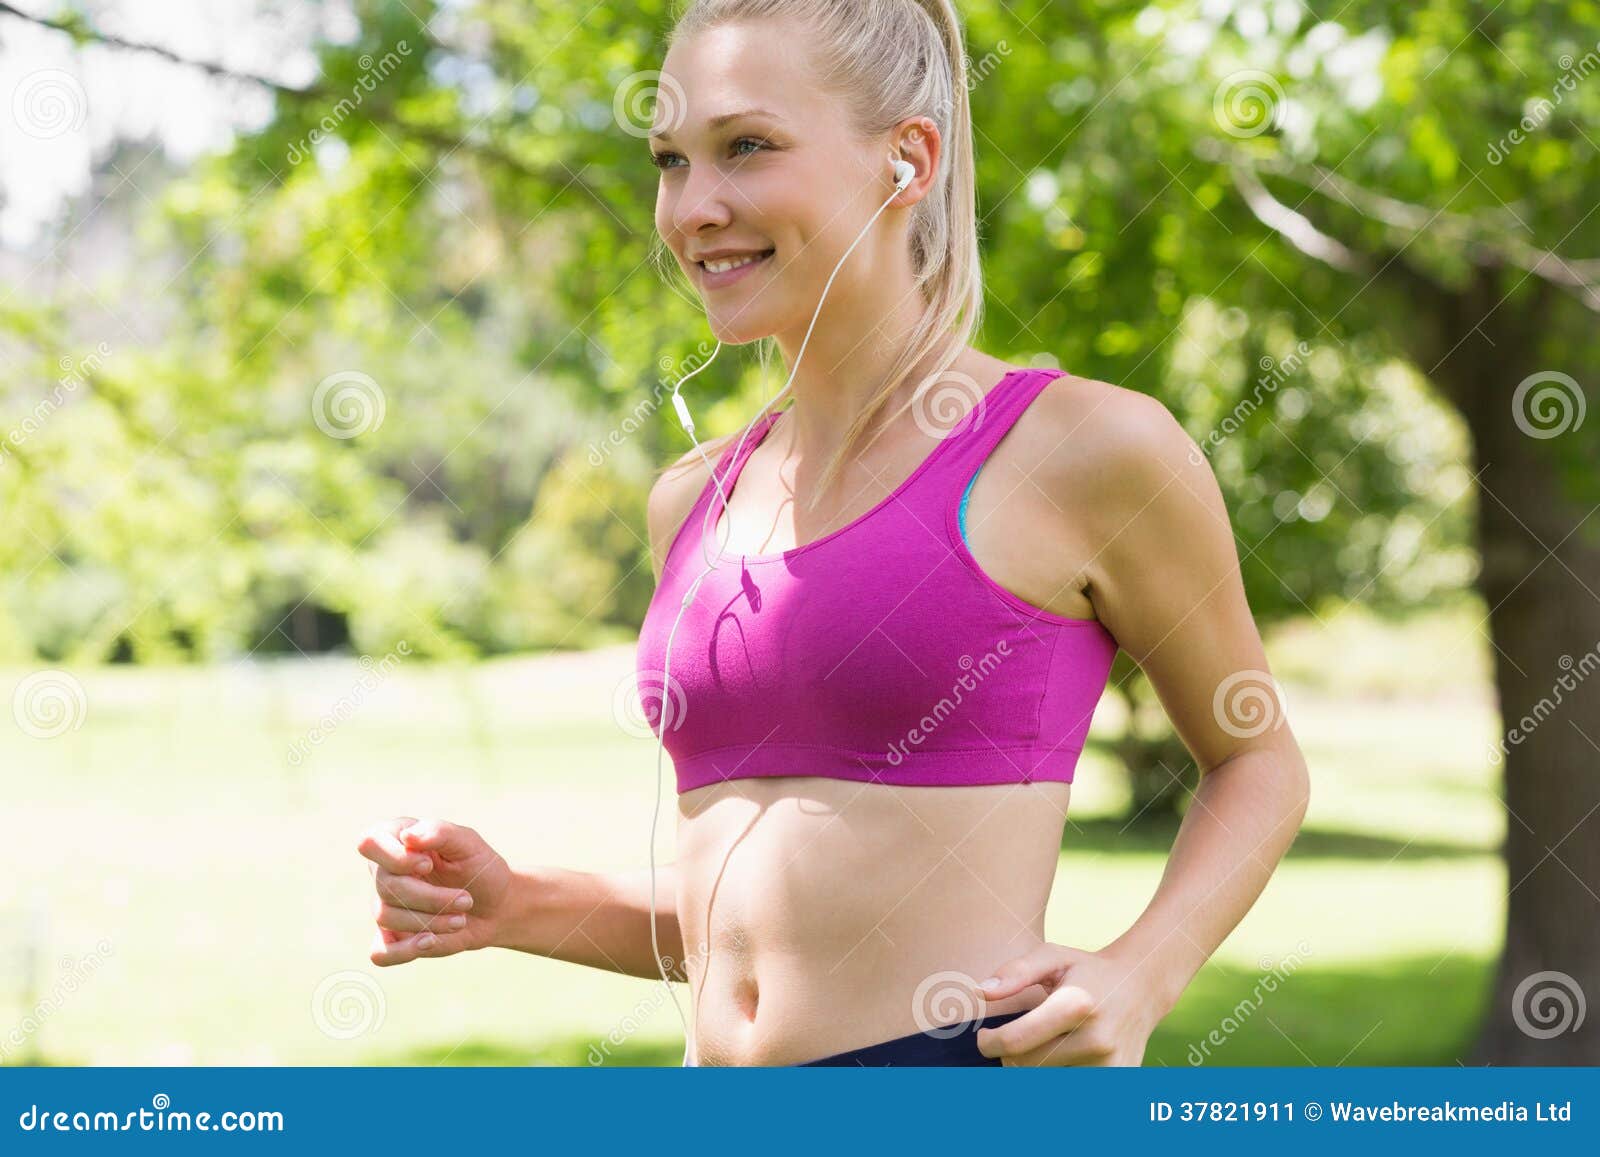 Healthy and Beautiful Young Woman in Sports Bra Jogging in Park Stock Image  - Image of view, length: 37821911